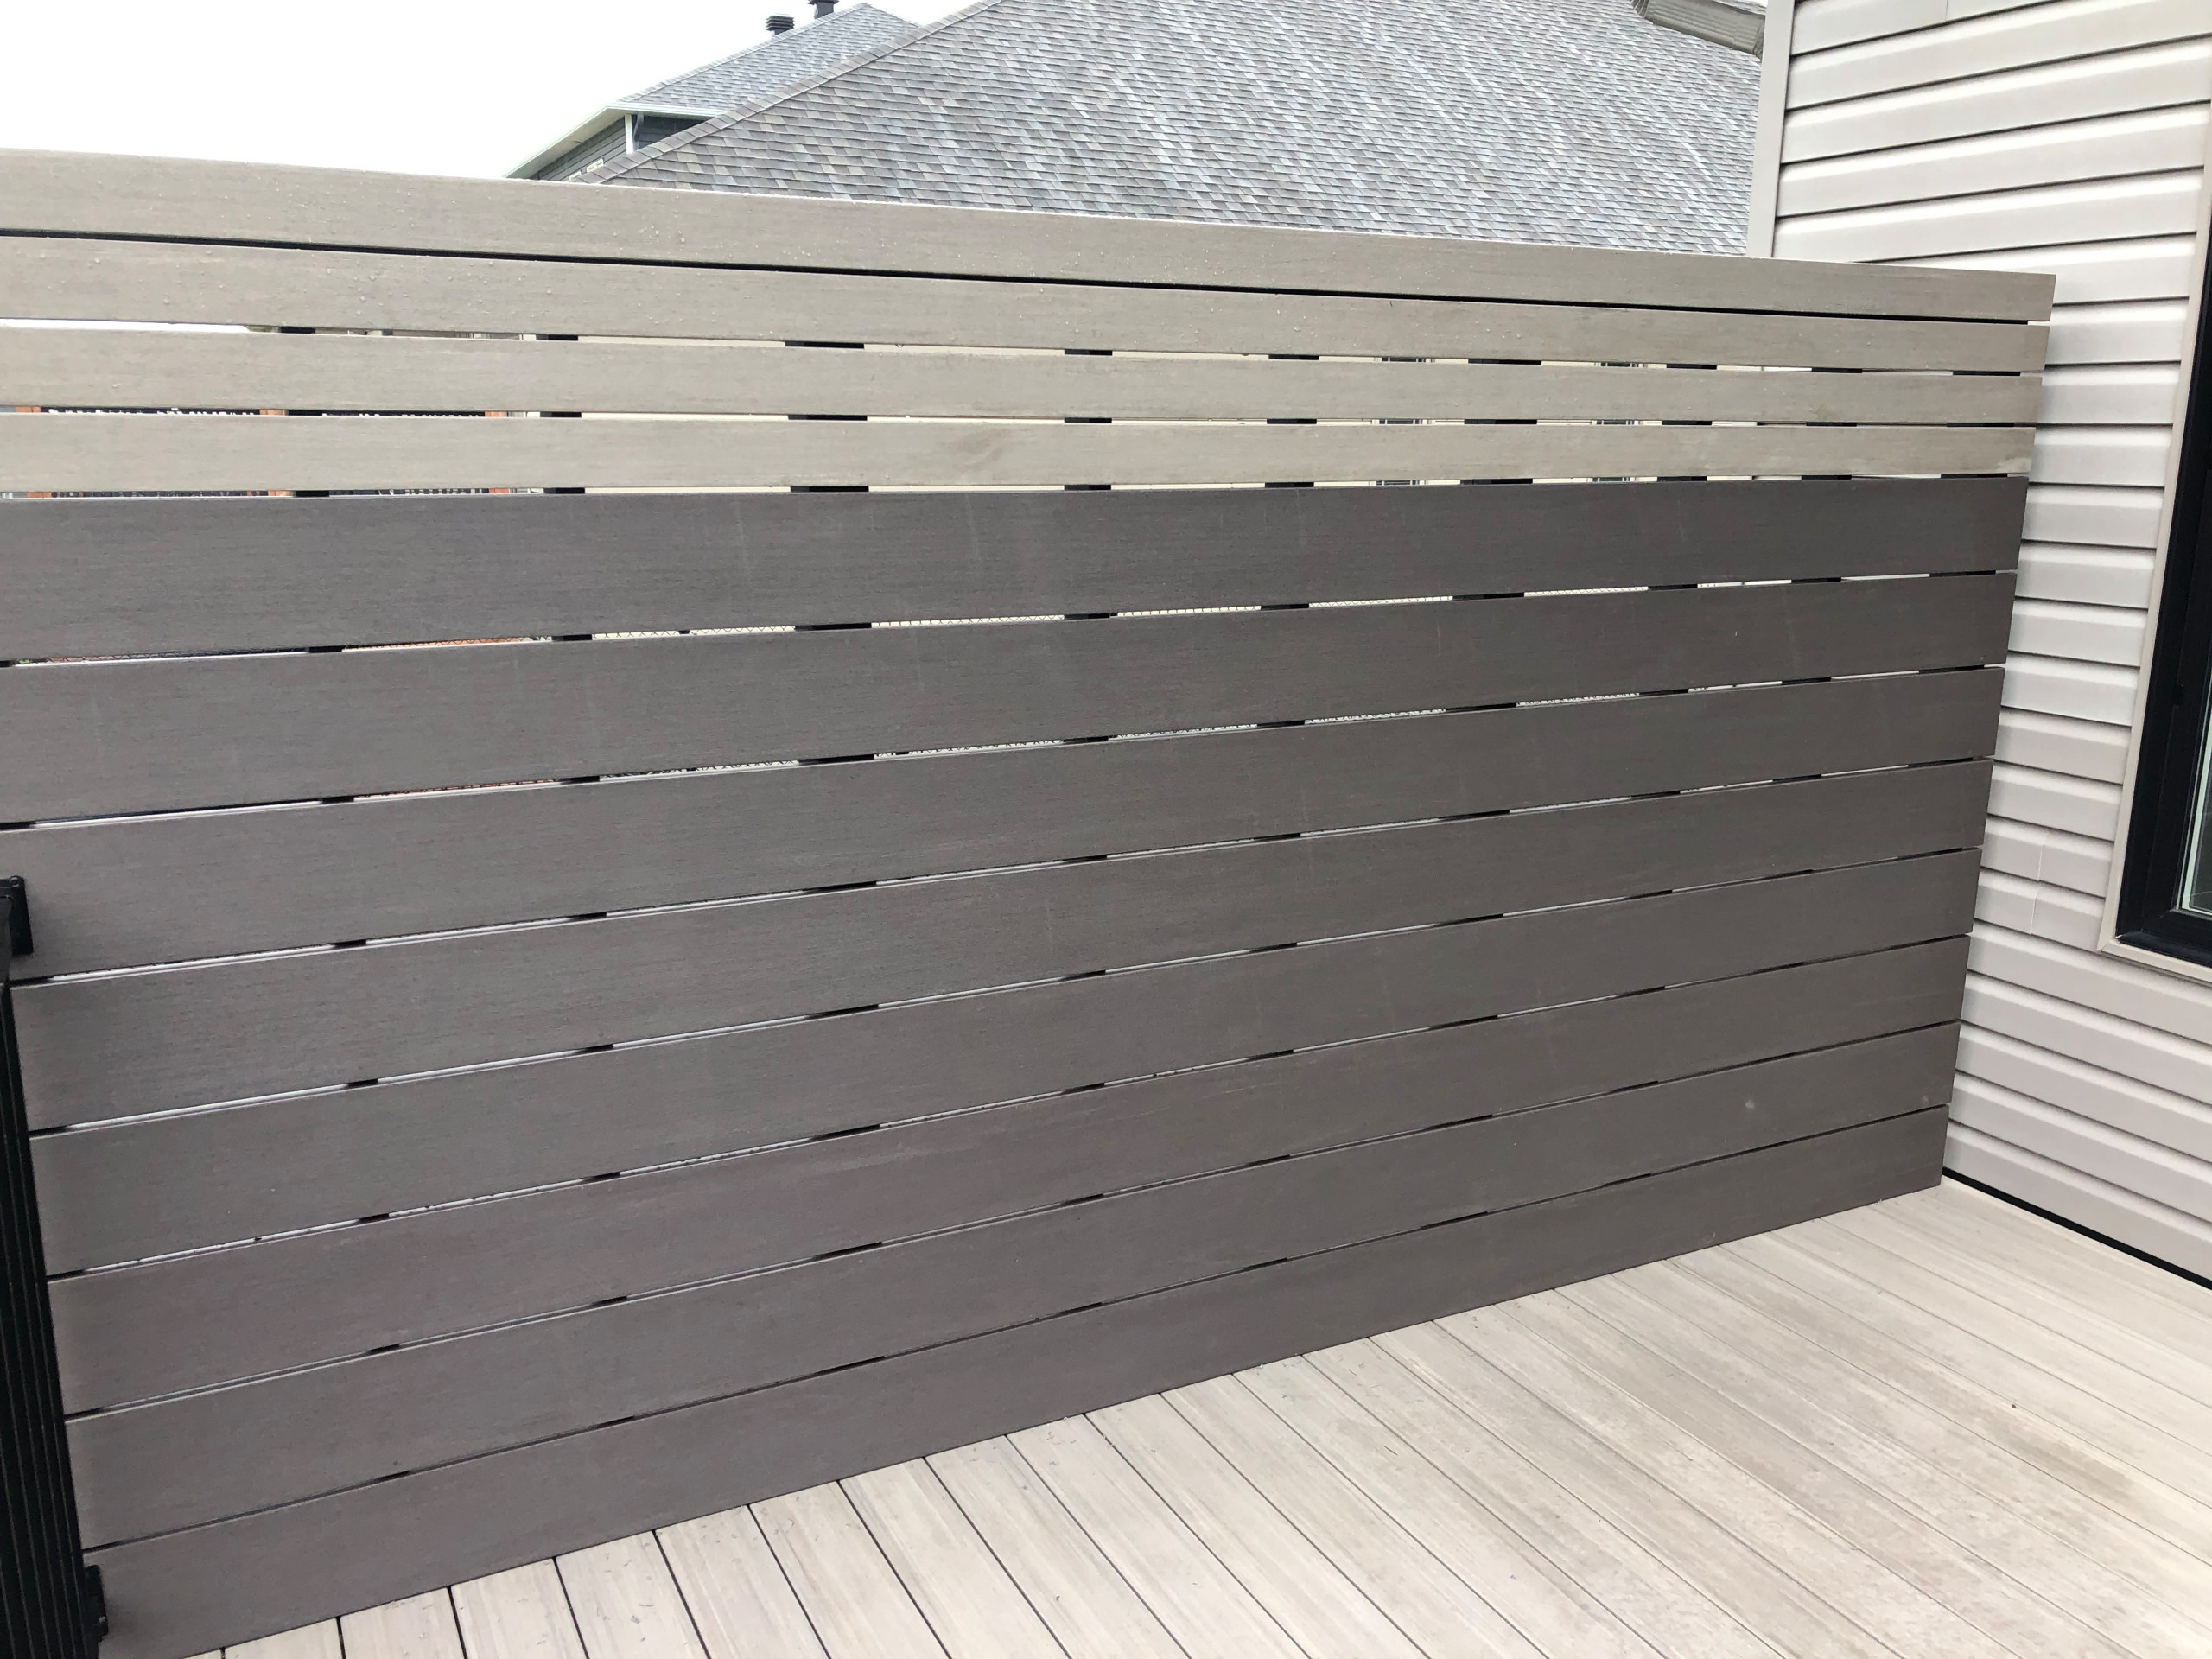 Coastline & Dark Hickory walkout with privacy screen